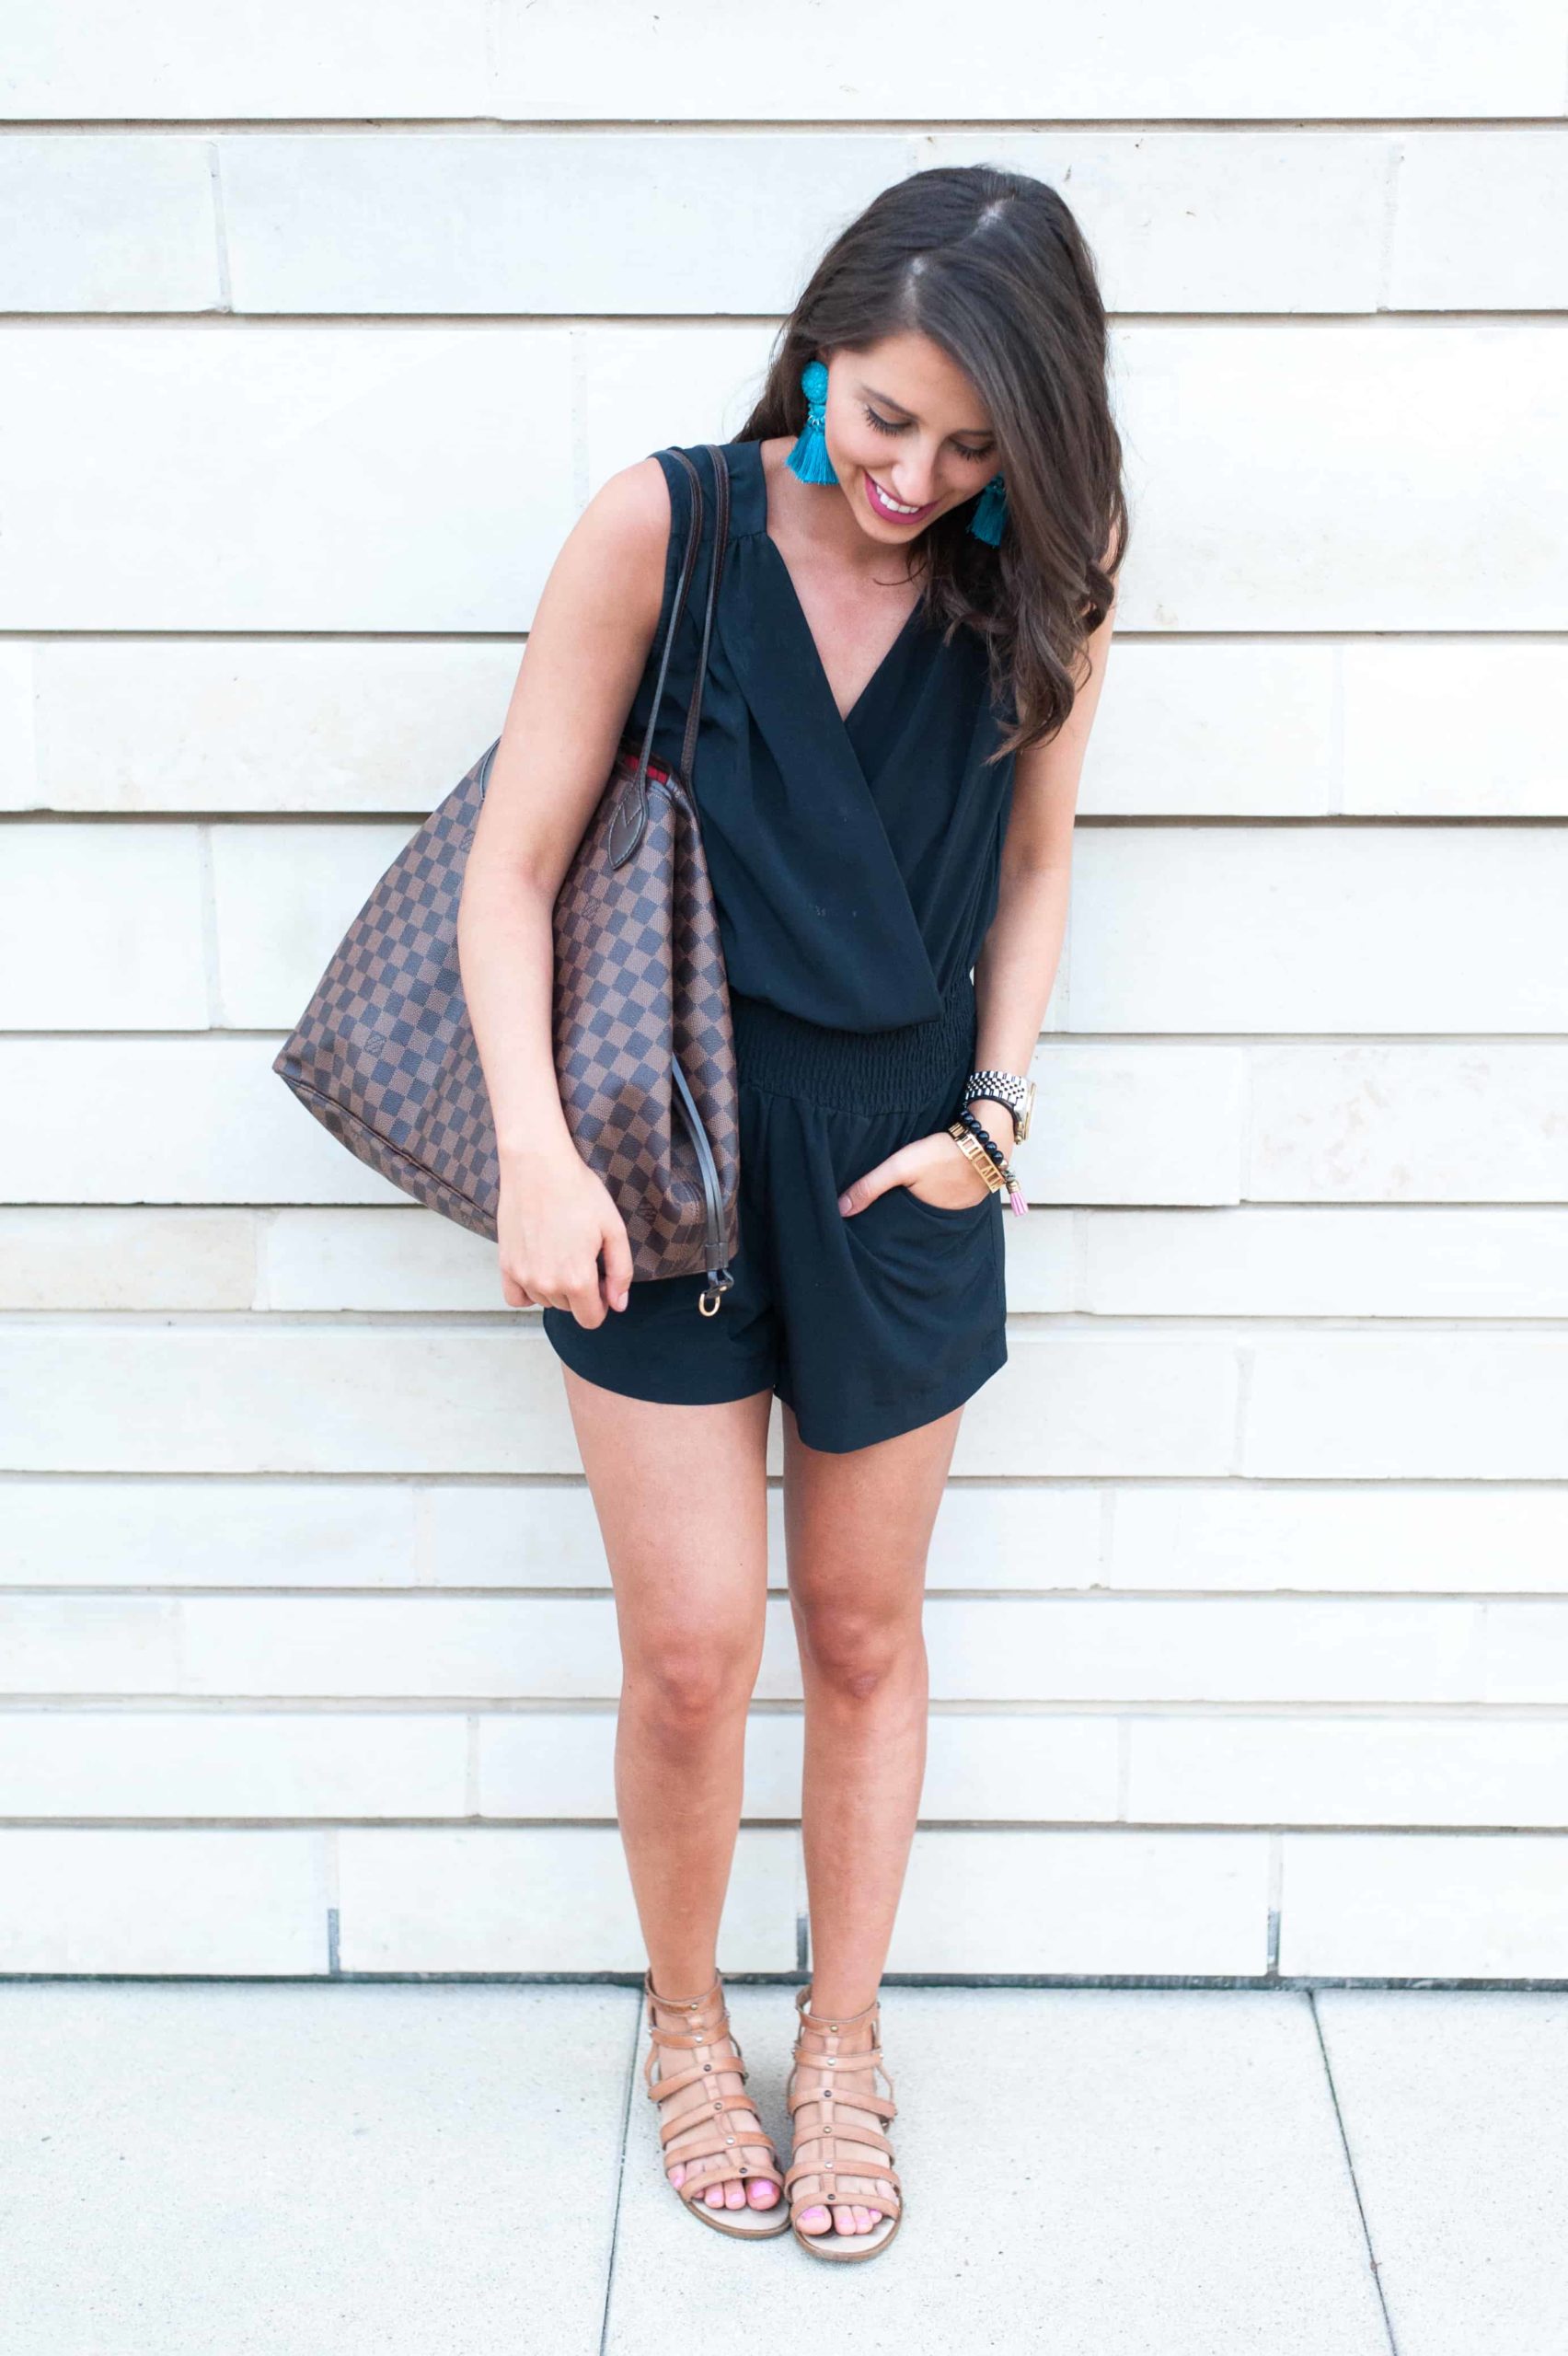 Dress Up Buttercup // A Houston-based fashion and inspiration blog developed to daily inspire your own personal style by Dede Raad | Black Romper for a Black Day